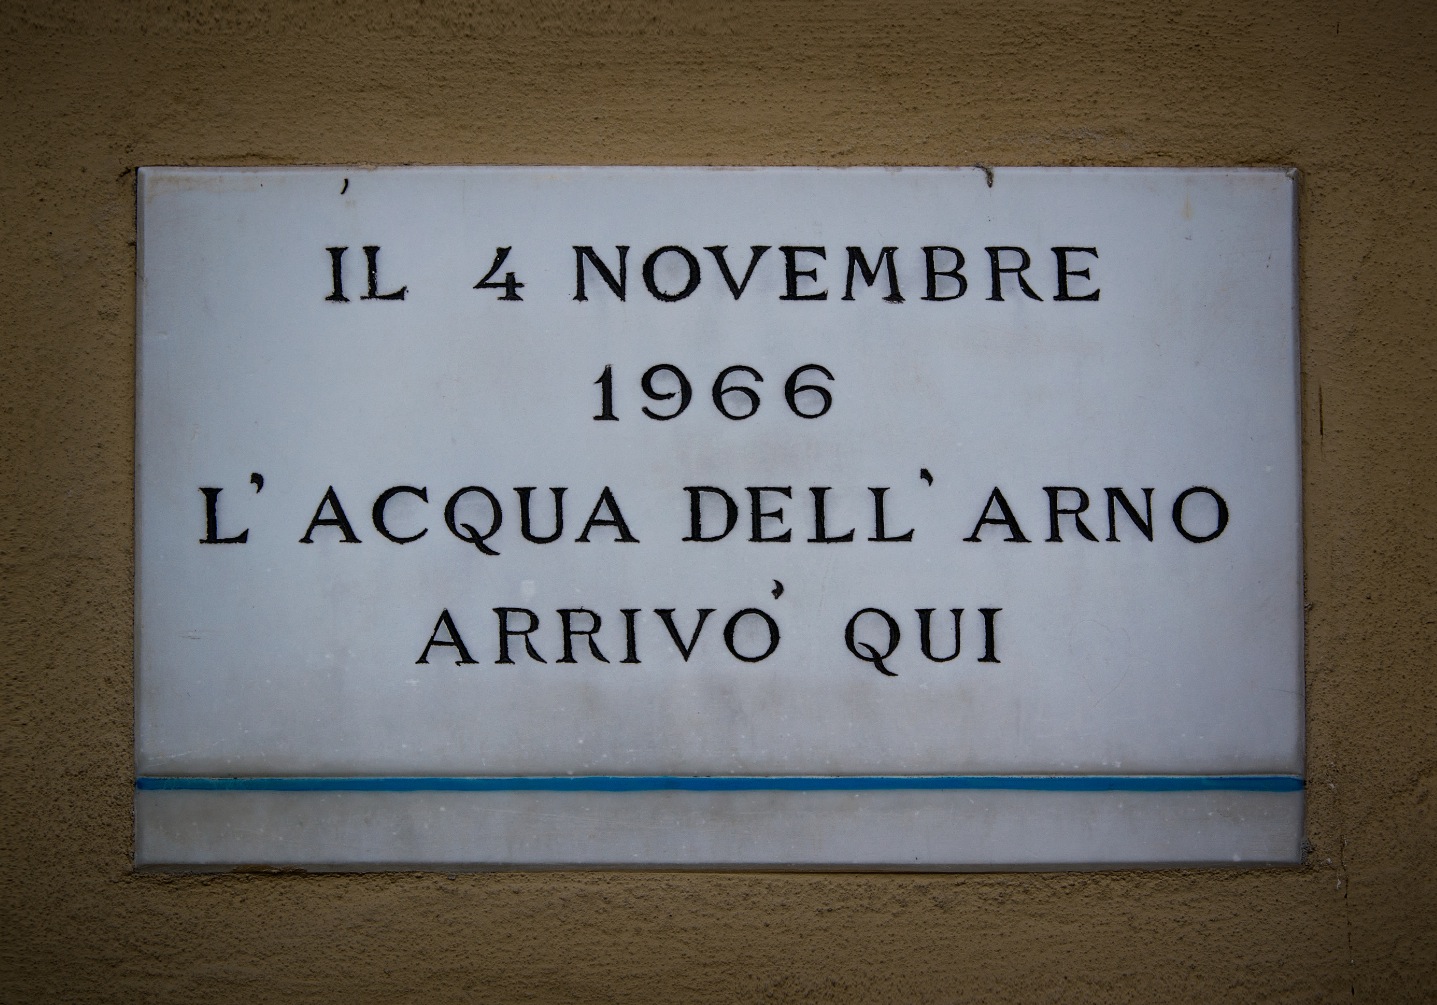 A Florentine flood marker indicating the depth of the waters in 1966